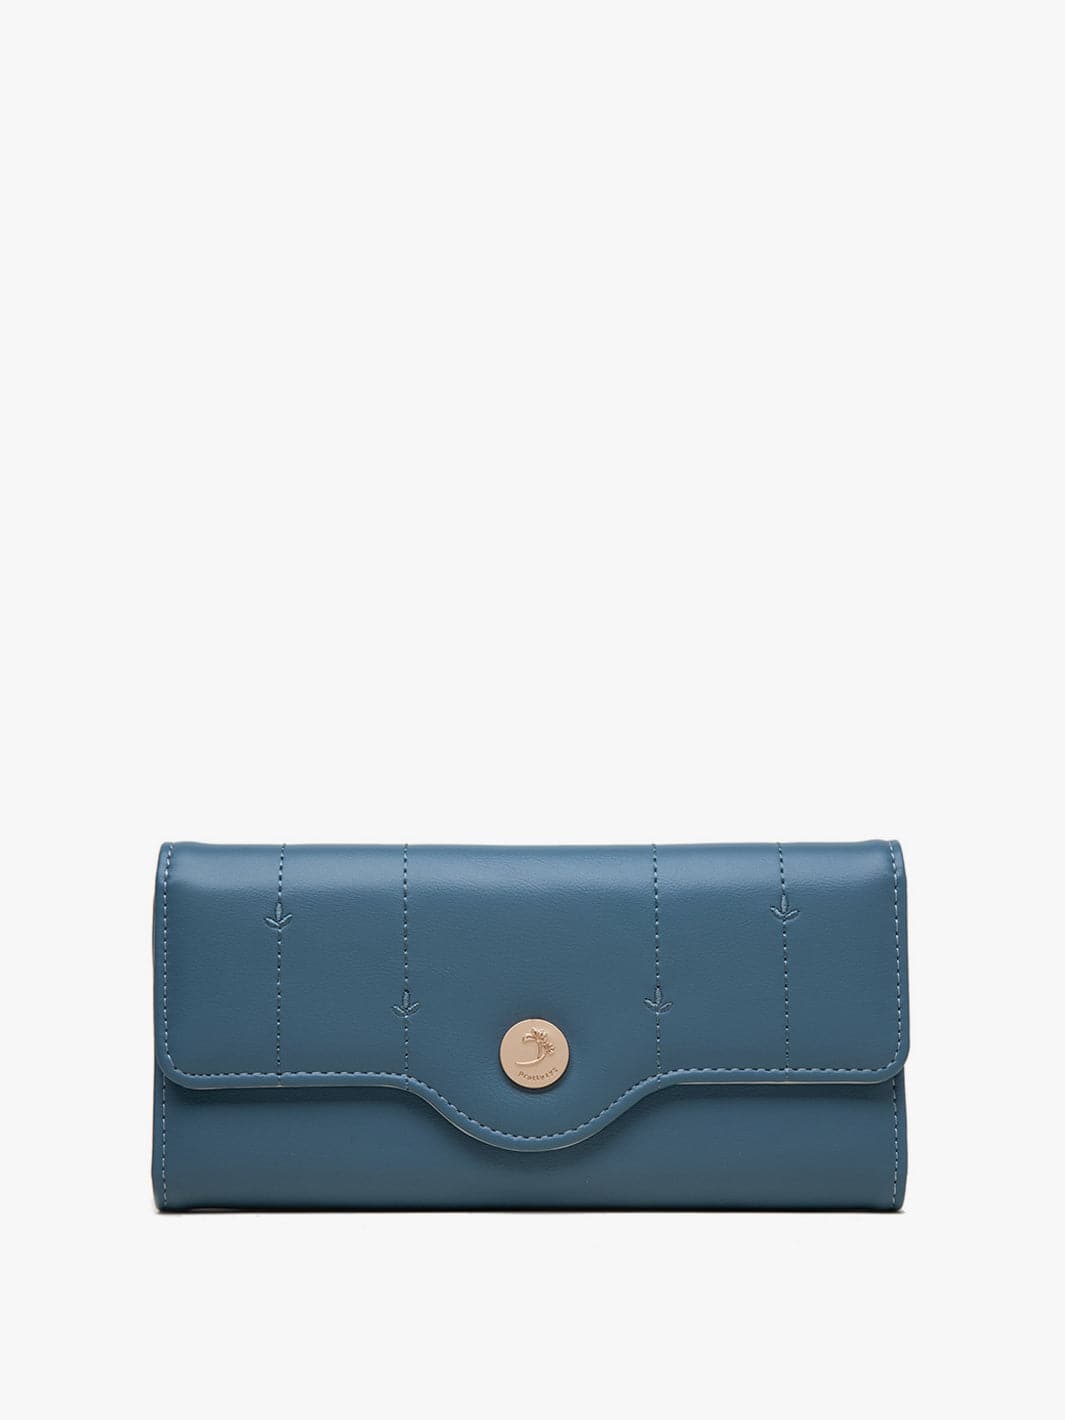 PU Soft Surface Solid Color Clutch